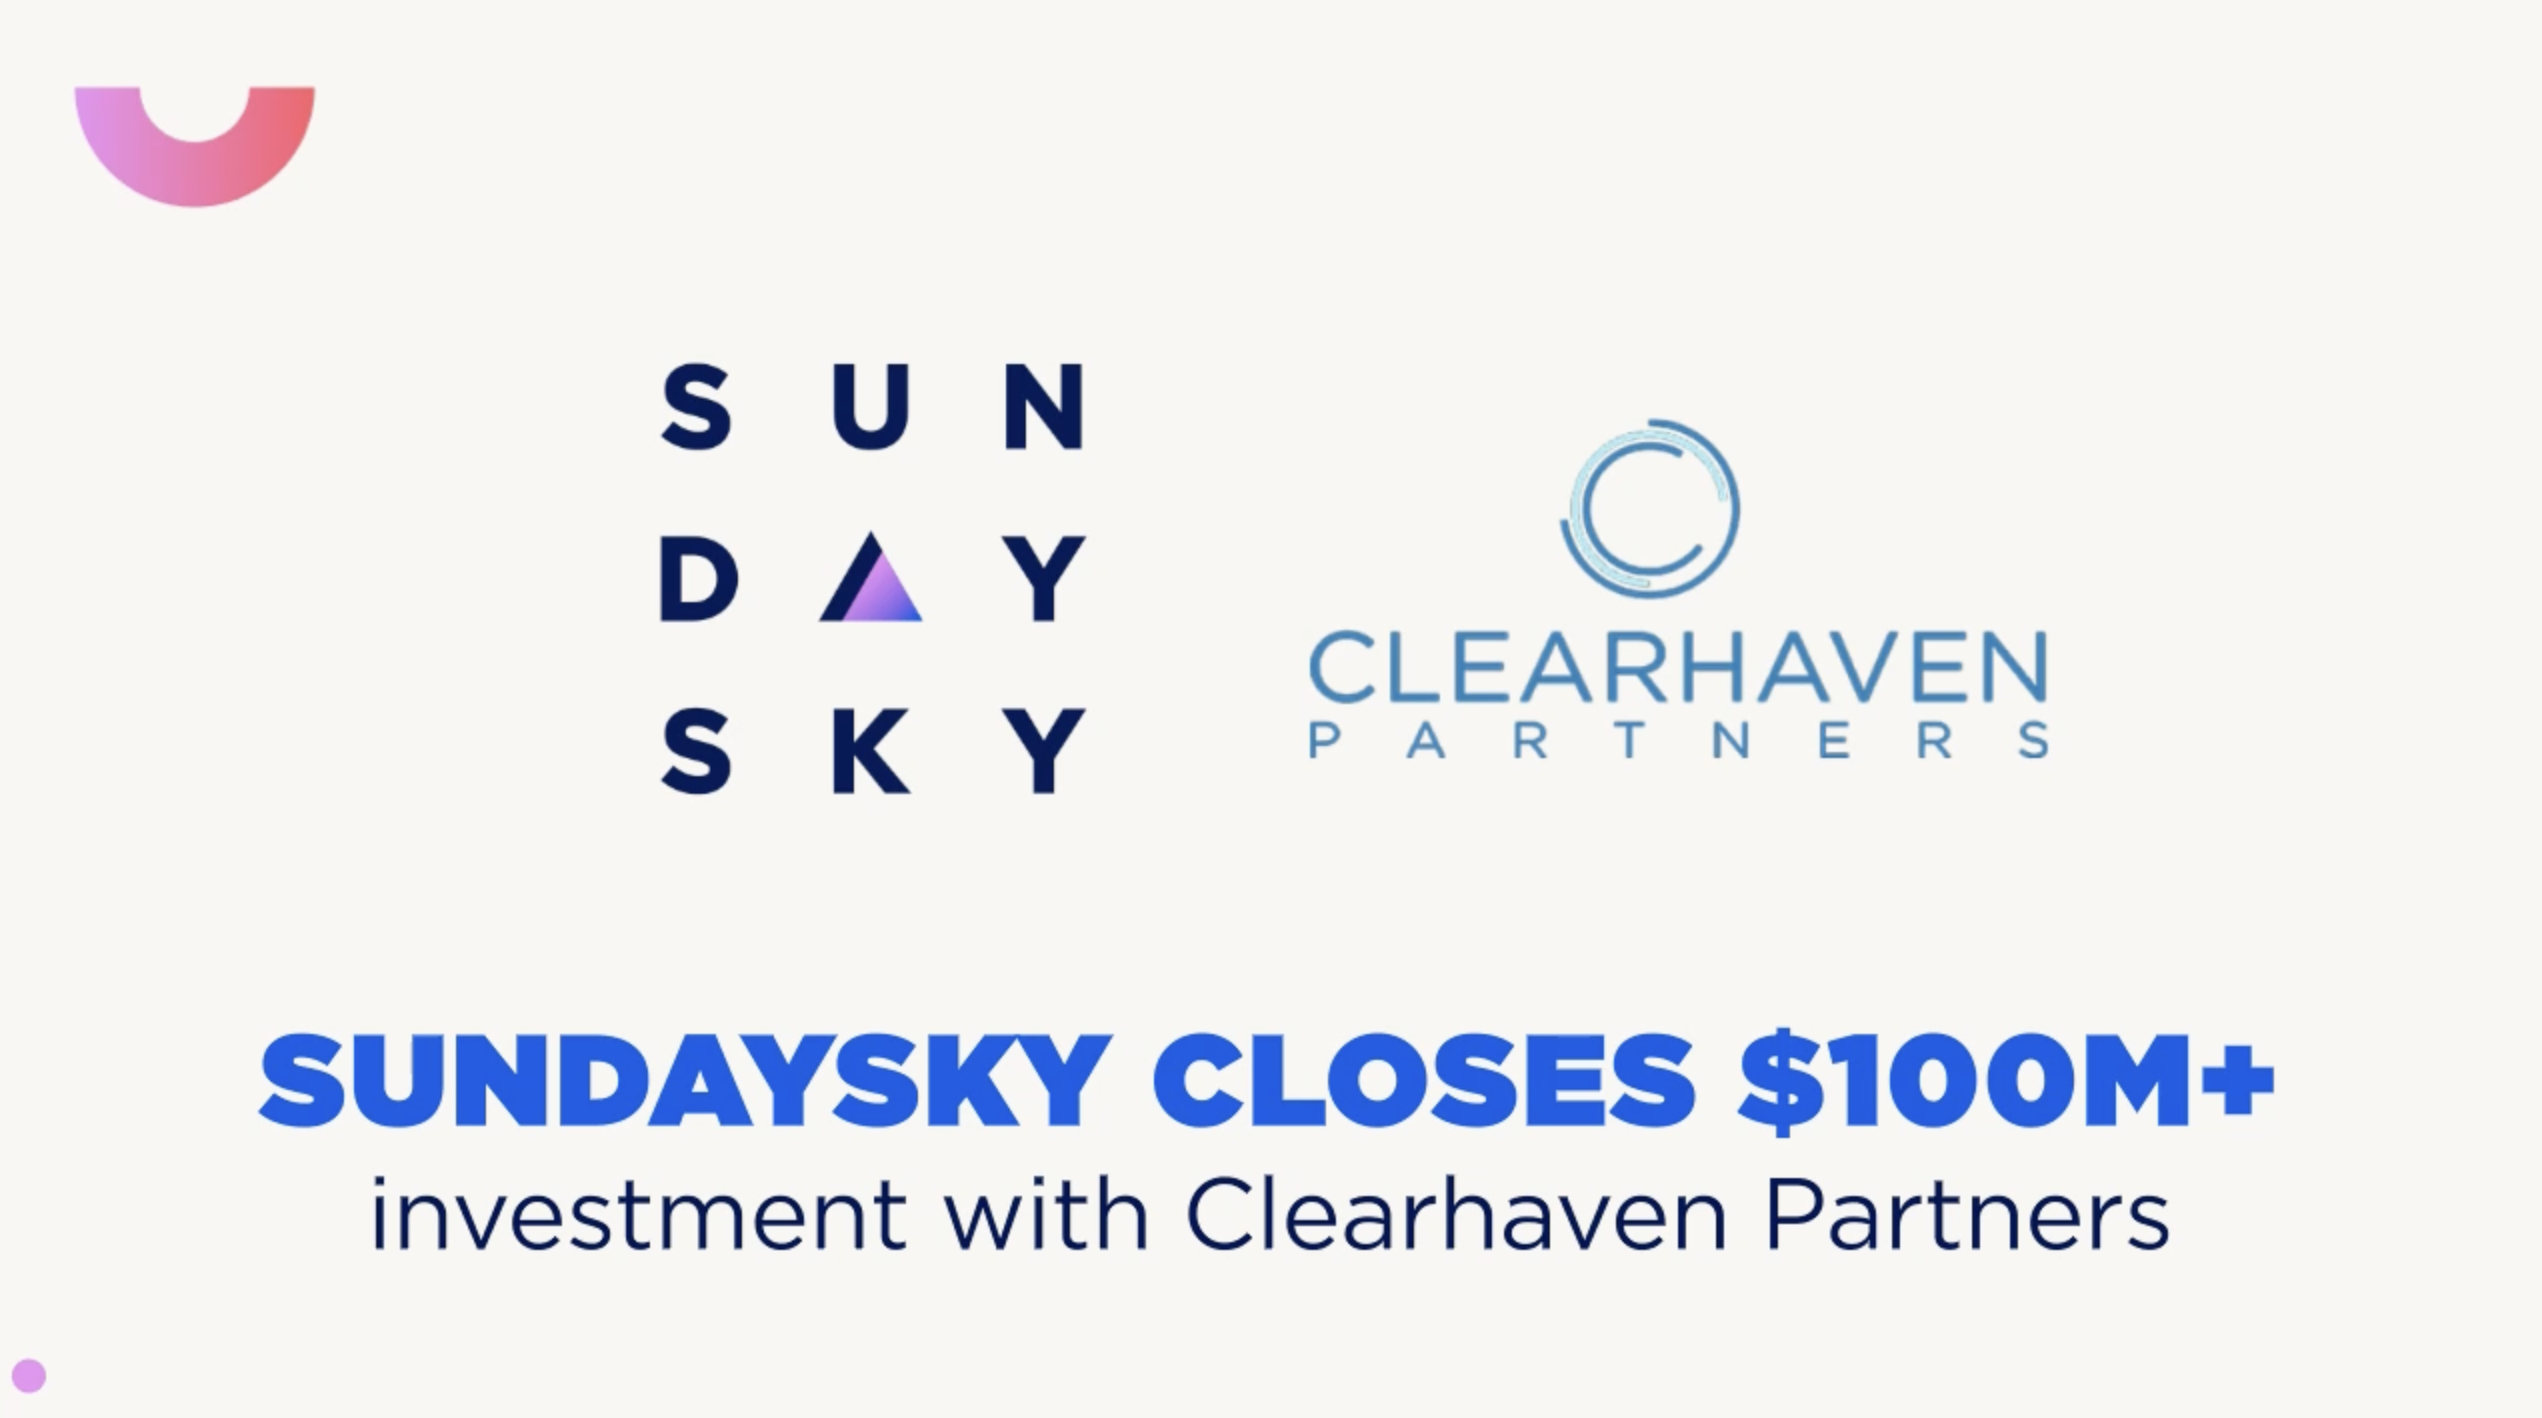 SundaySky Closes $100M+ investment with Clearhaven Partners